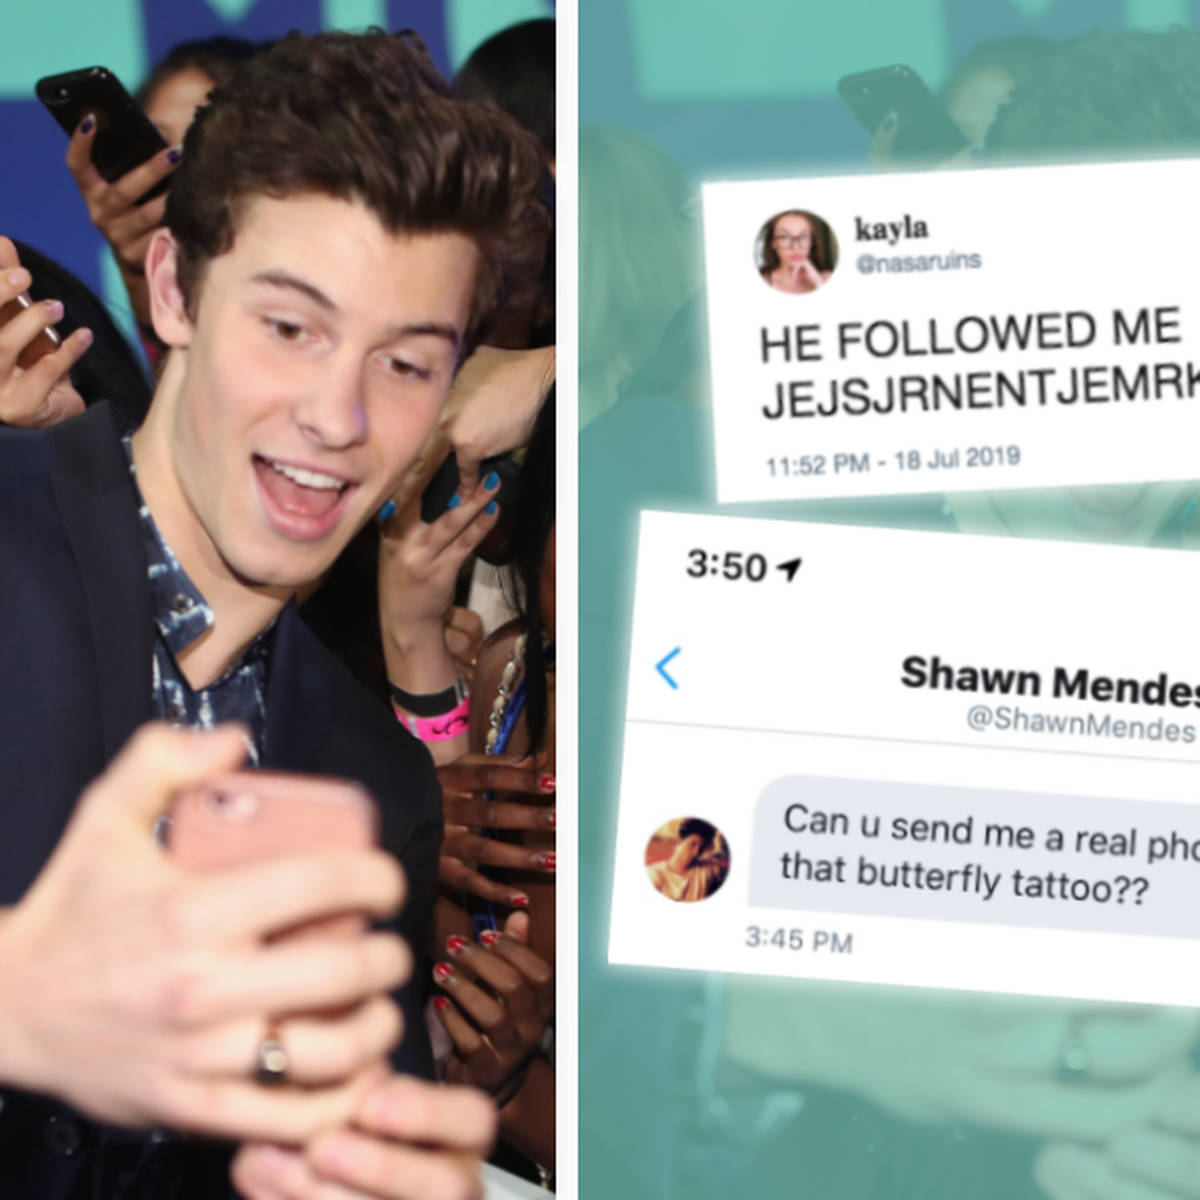 Shawn Mendes Slid Into A Fan's DMs To Ask About A Tattoo Design - Capital